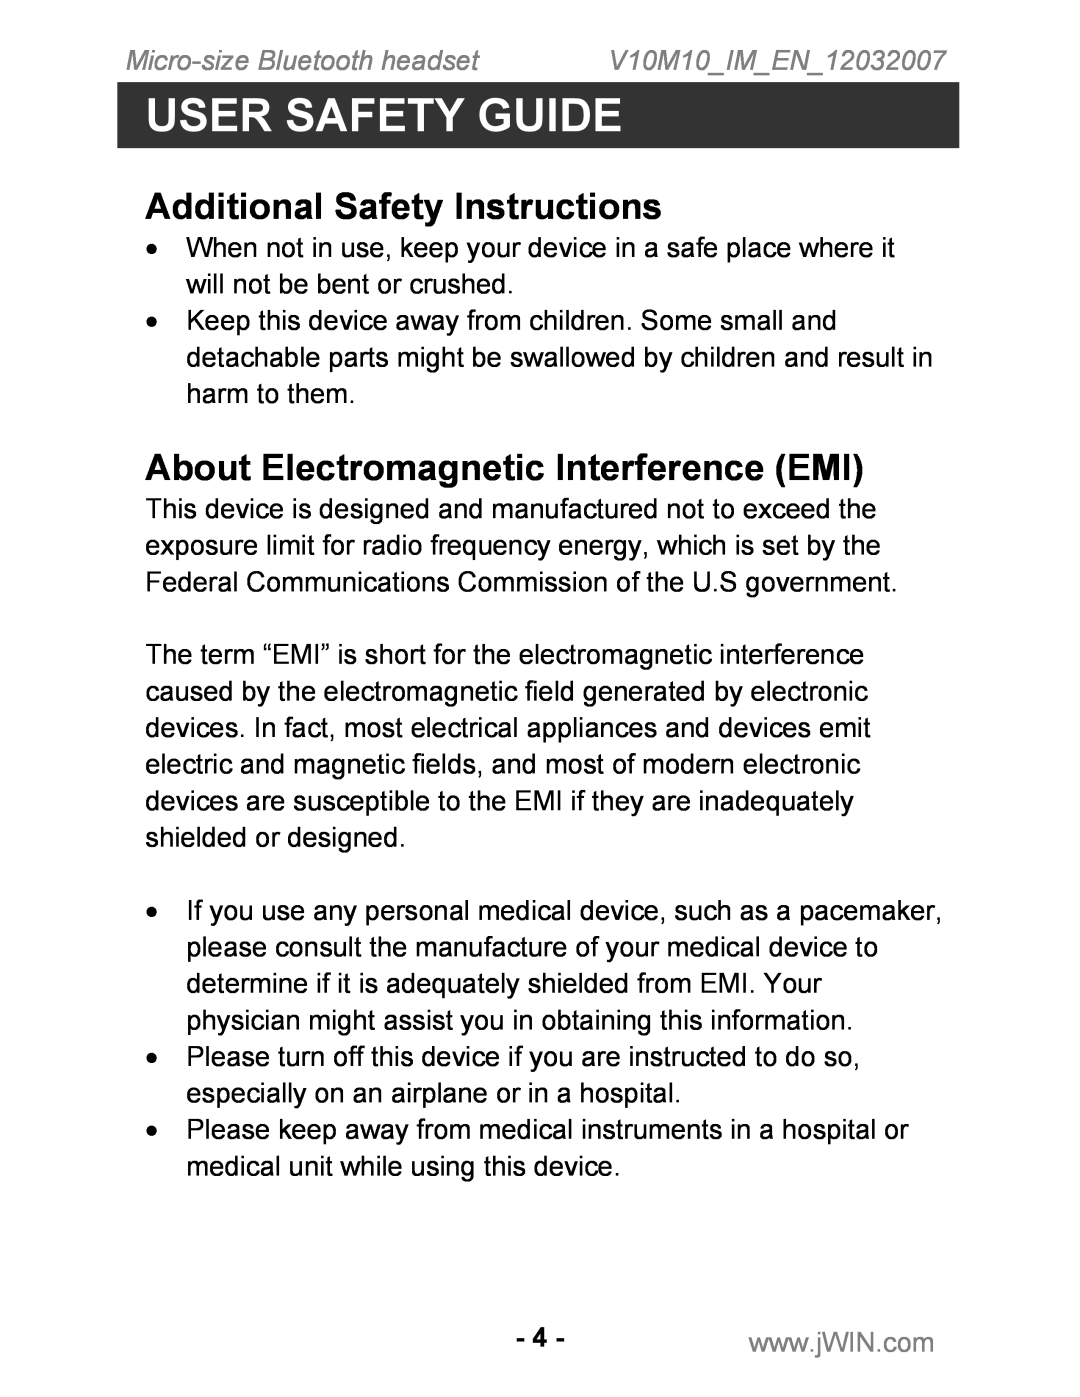 Jwin JB-TH210 instruction manual Additional Safety Instructions, About Electromagnetic Interference EMI, User Safety Guide 